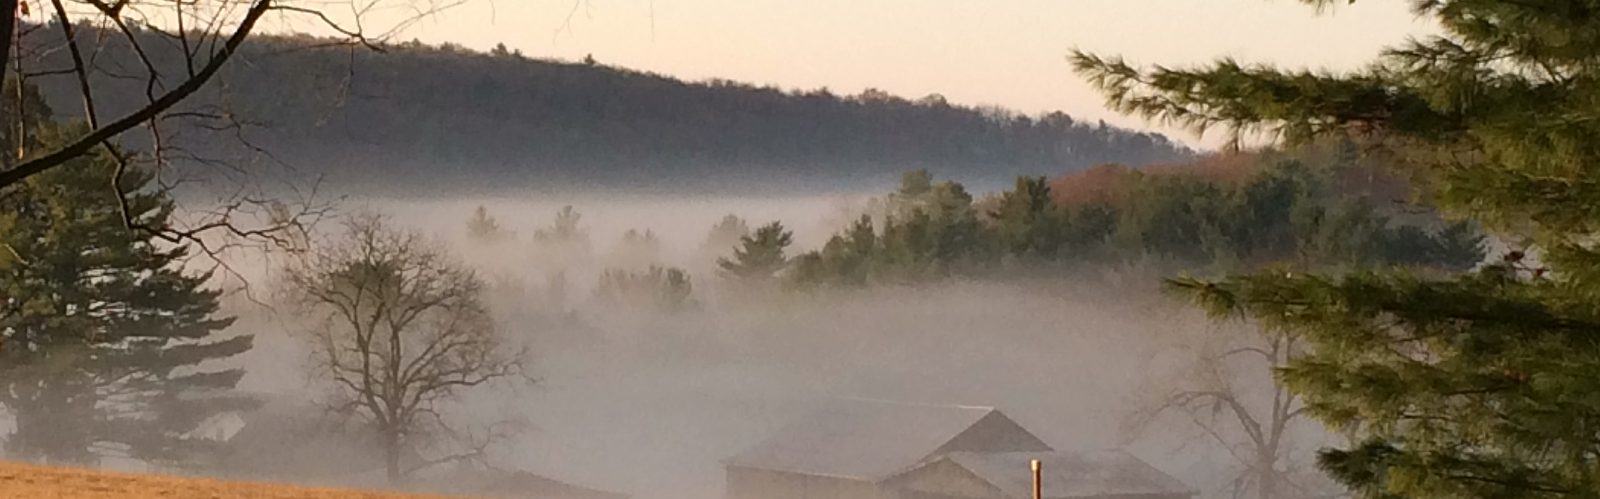 Misty view over Jackson Township